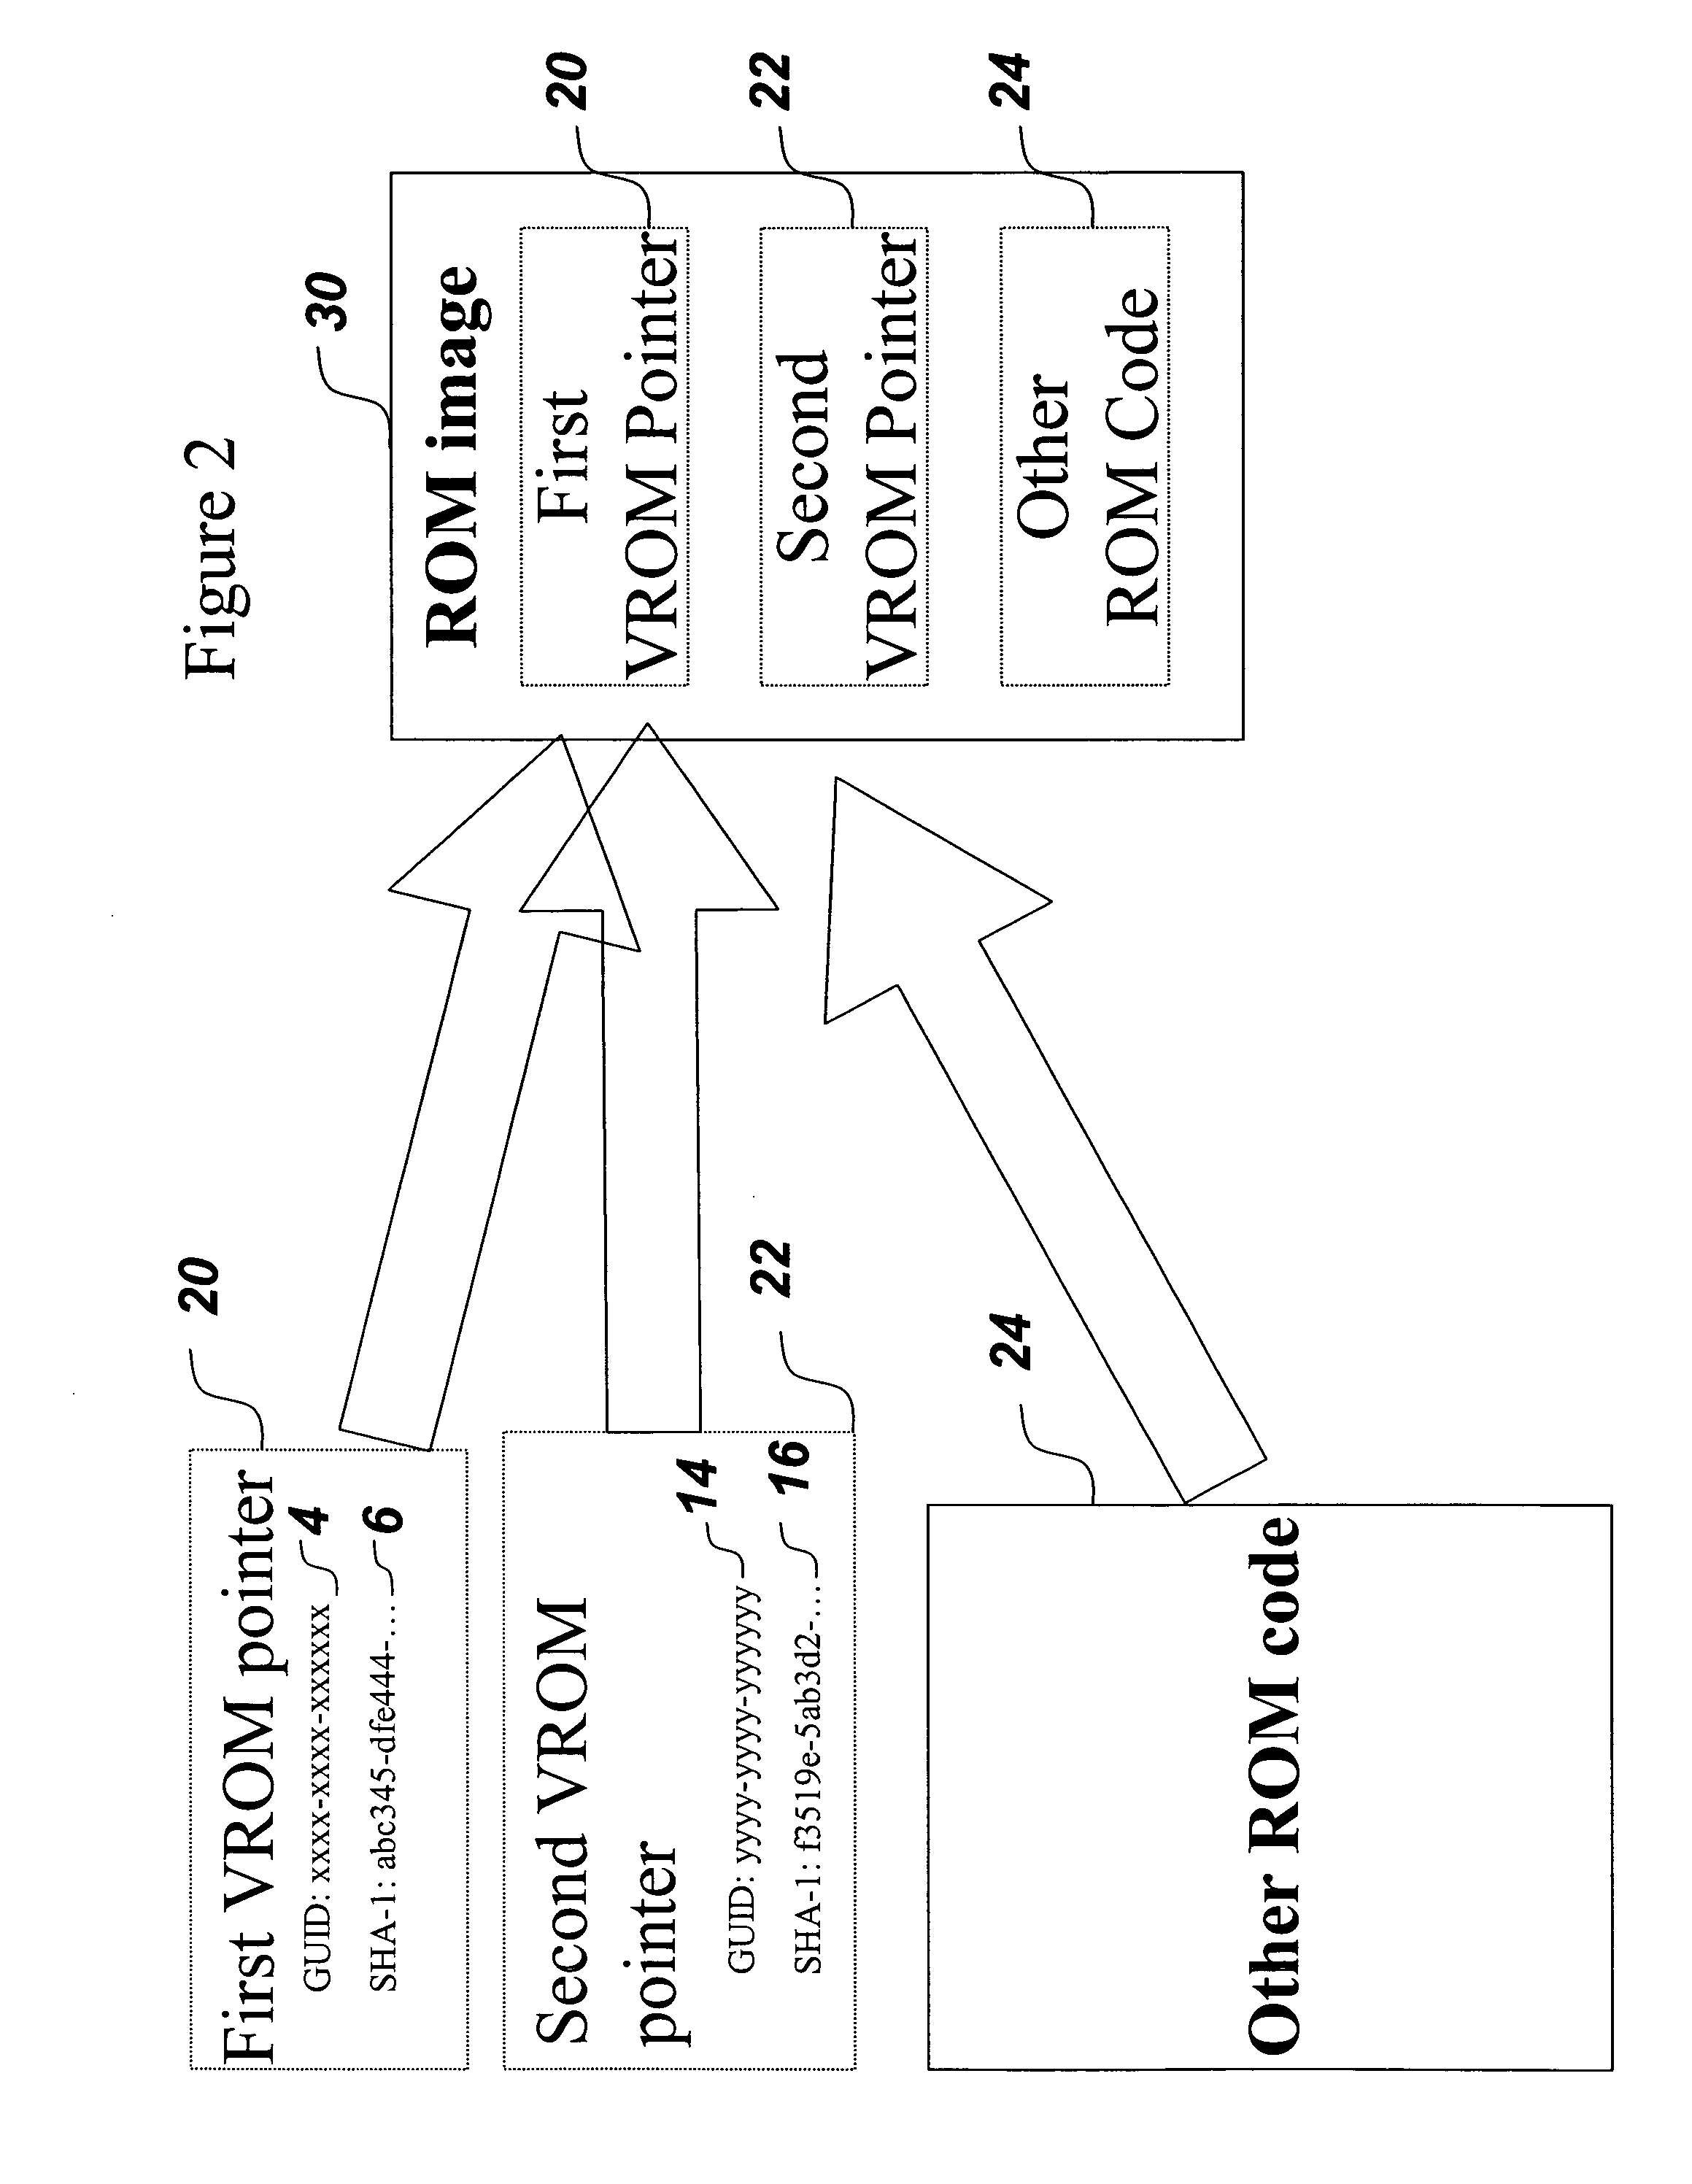 System and method for updating firmware in a secure manner